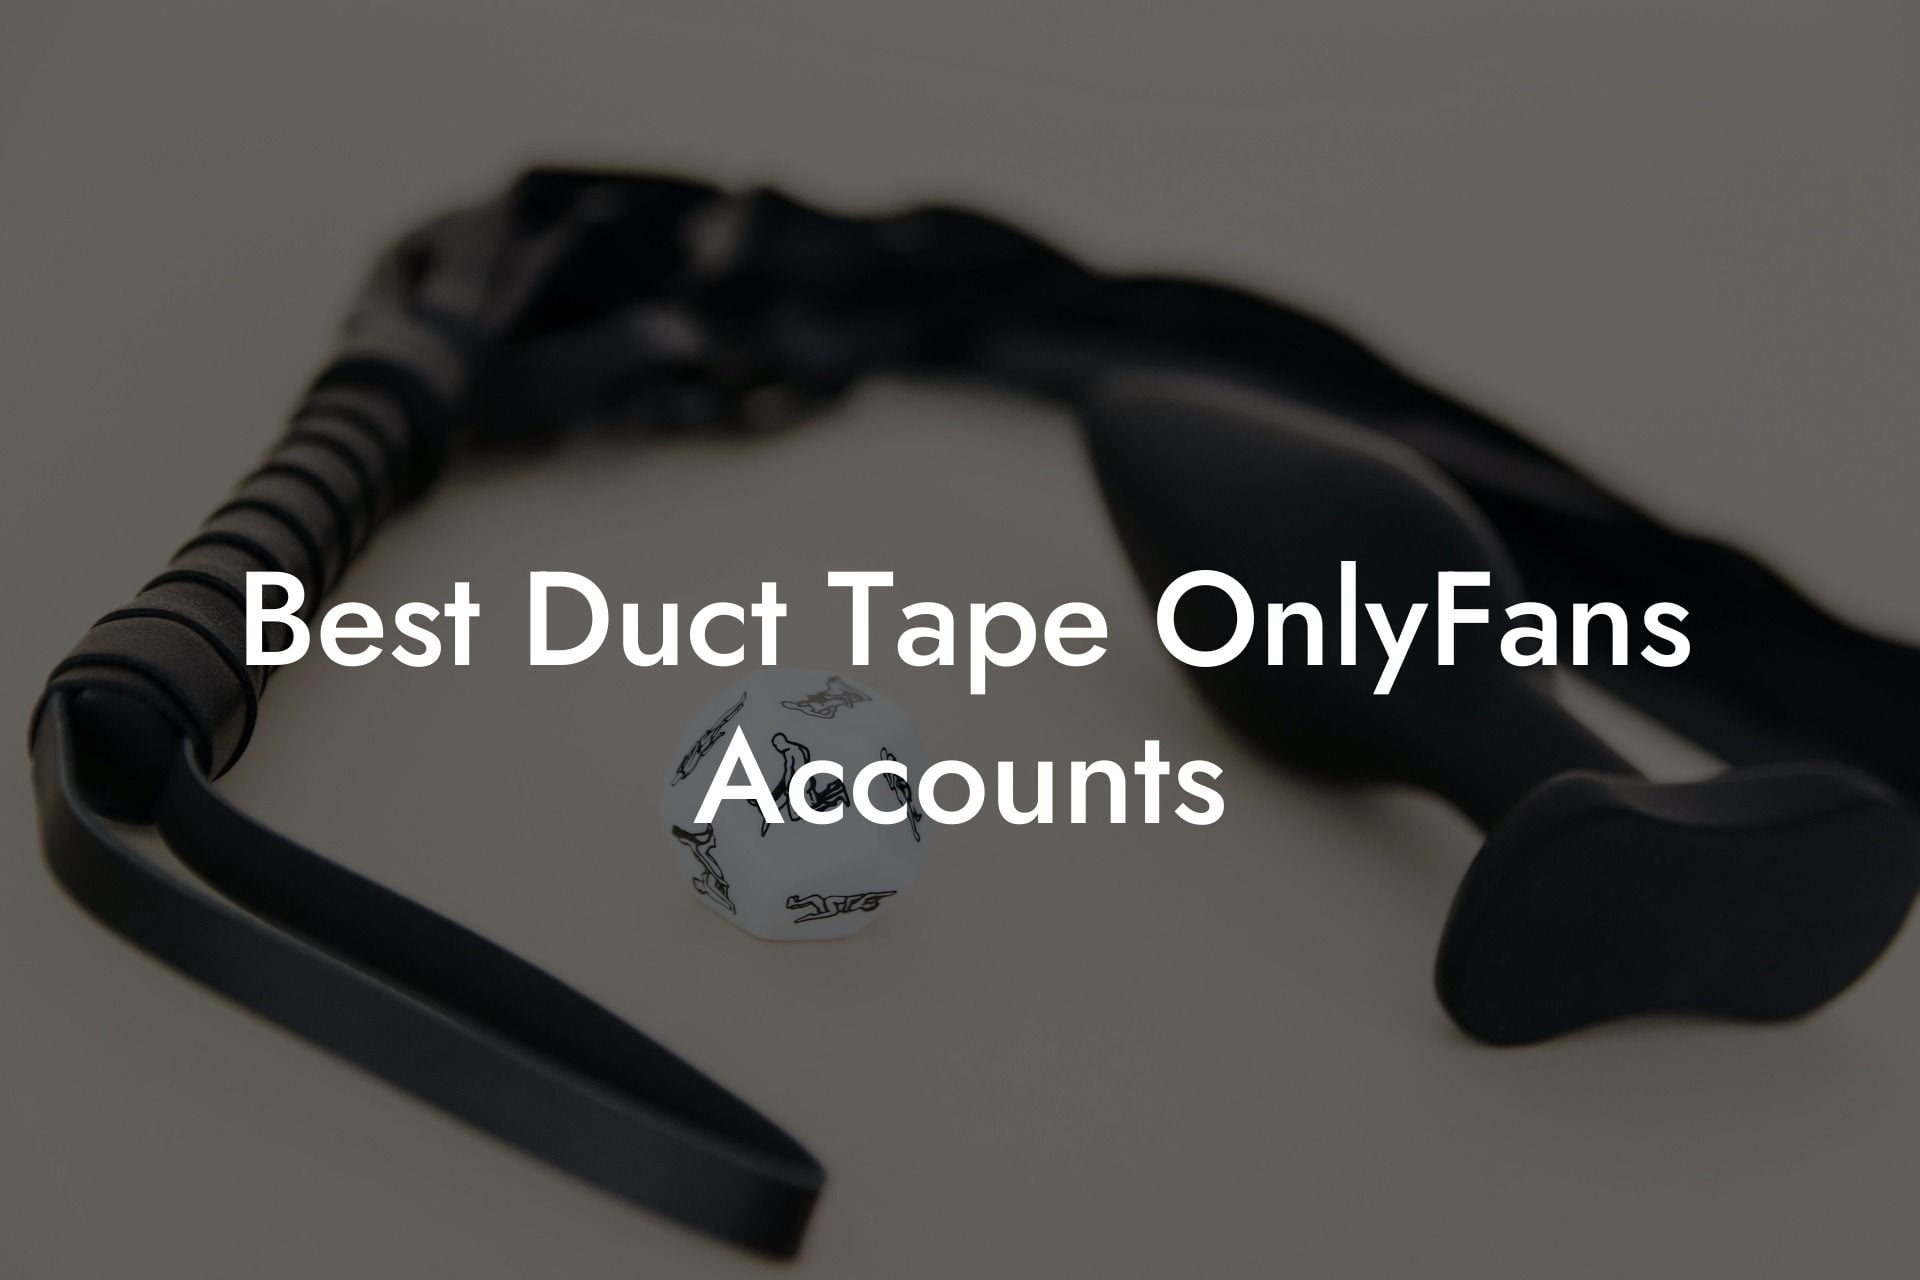 Best Duct Tape OnlyFans Accounts